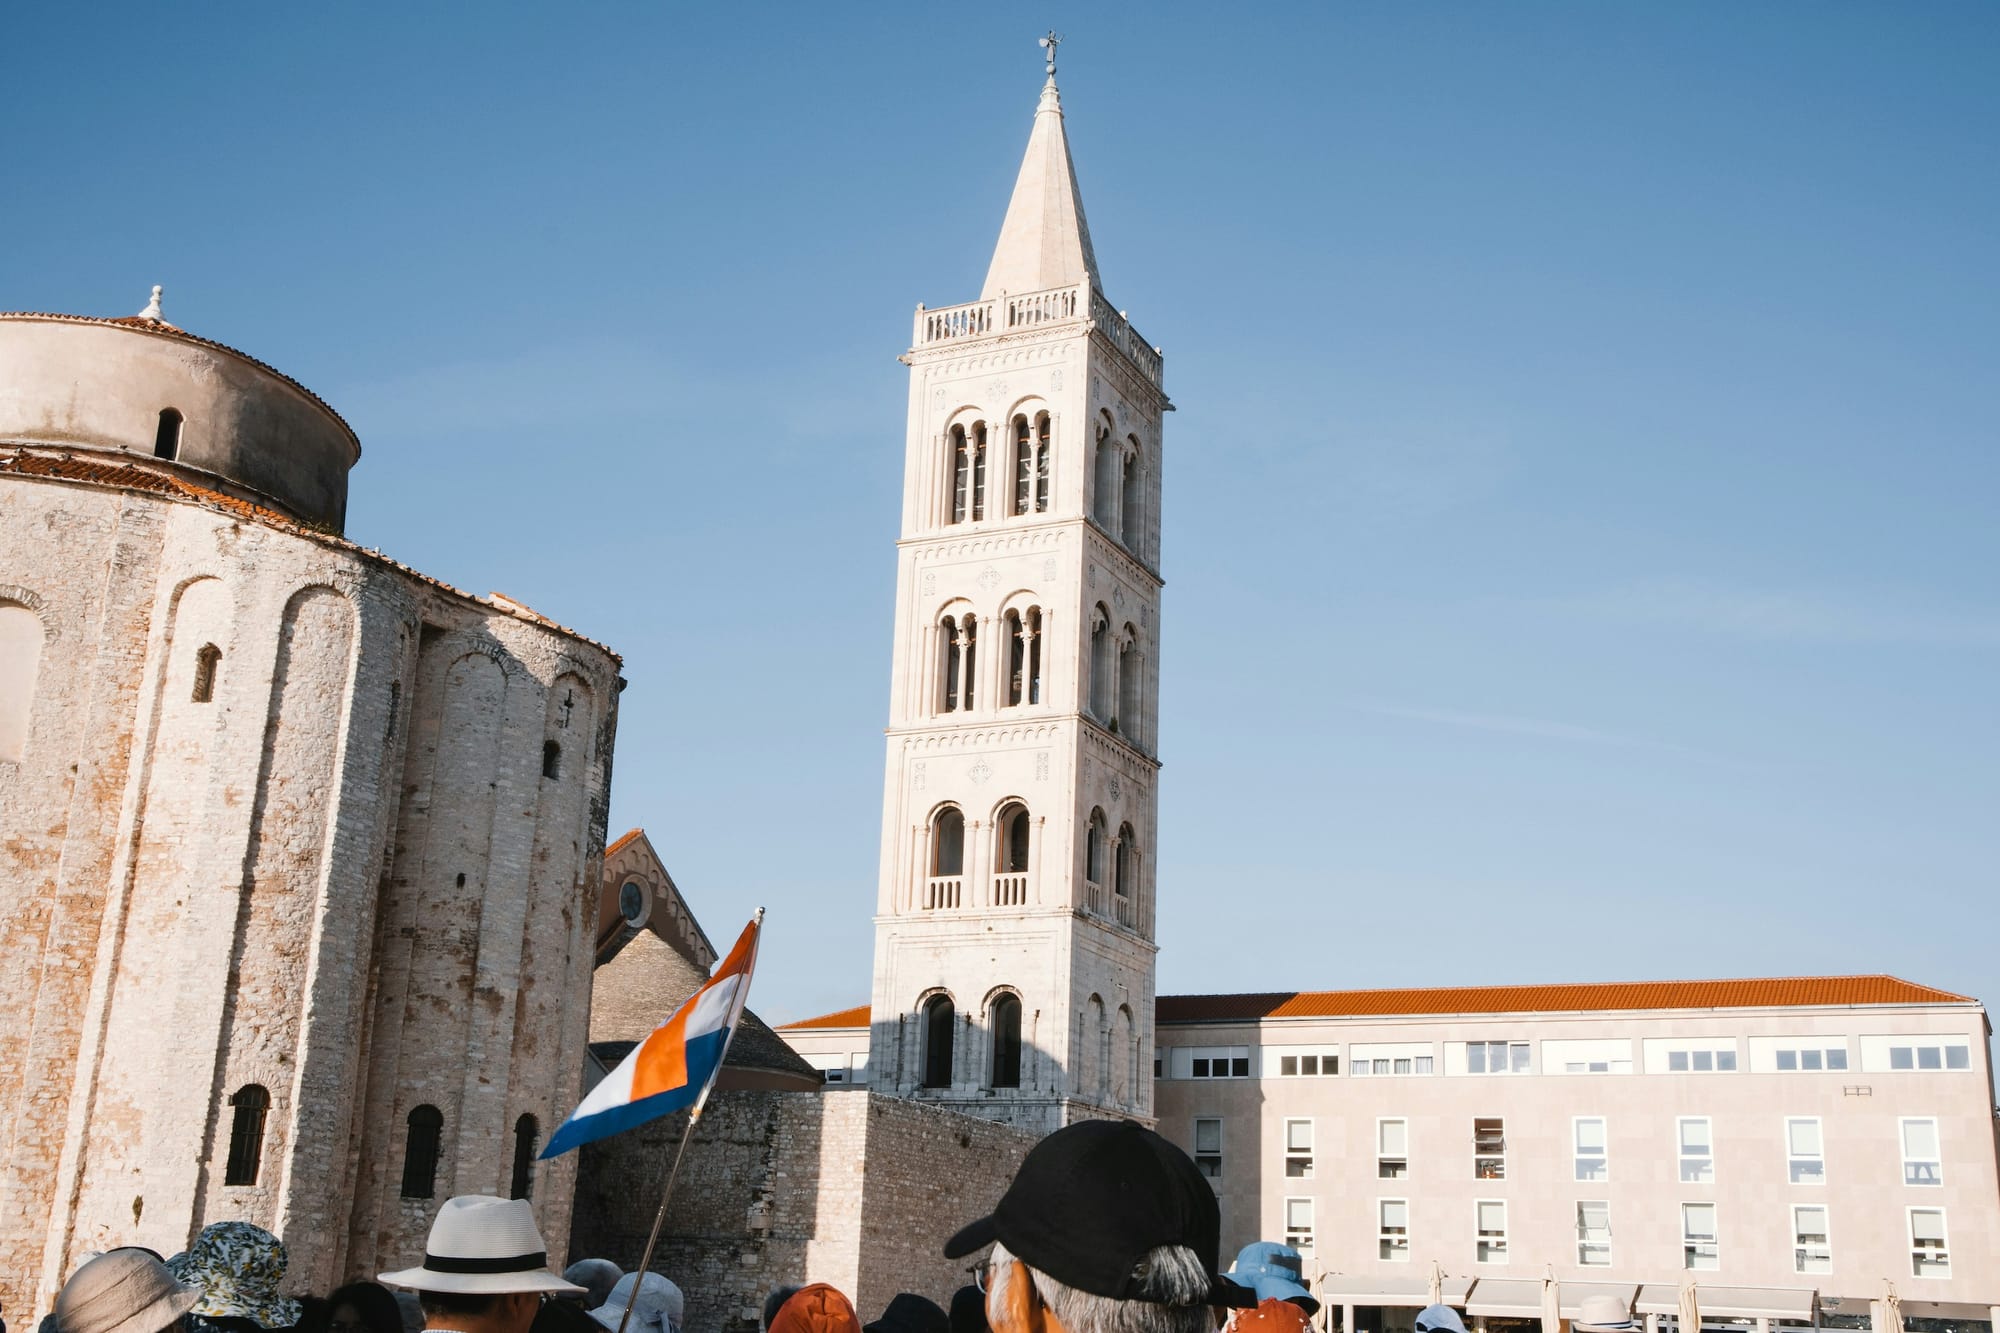 St. Donat Church and St. Anastasia bell tower in Zadar, Croatia